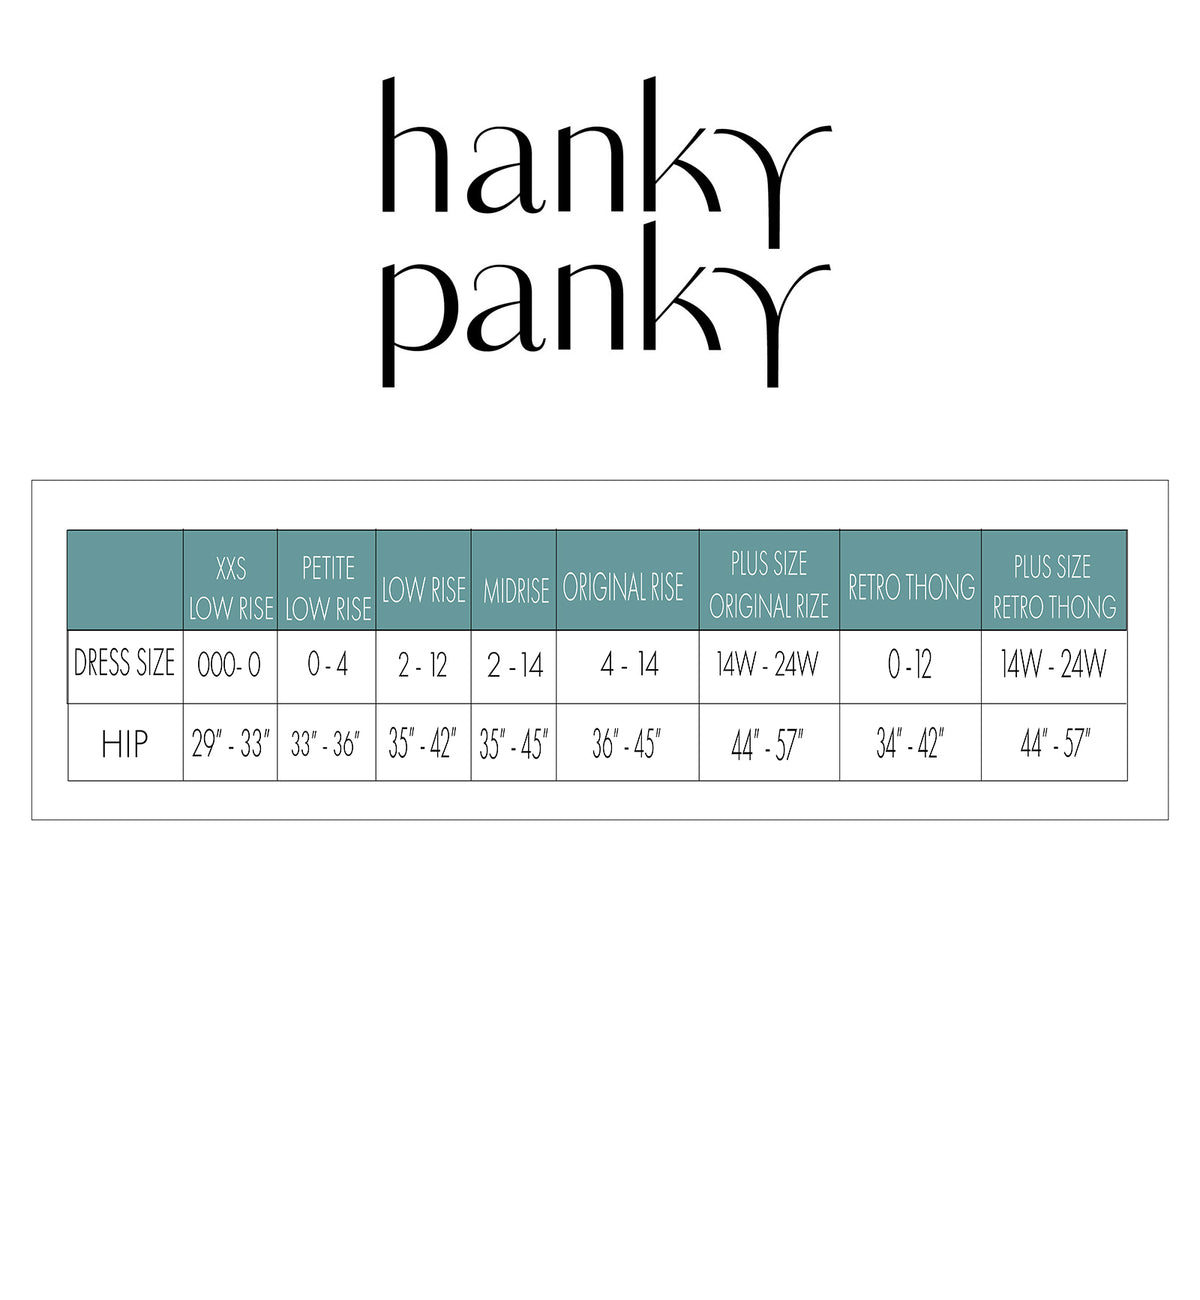 Hanky Panky Daily Lace Cross-Dye Original Rise Thong (791104),Blueberries/Butterfly - Blueberries/Butterfly,One Size